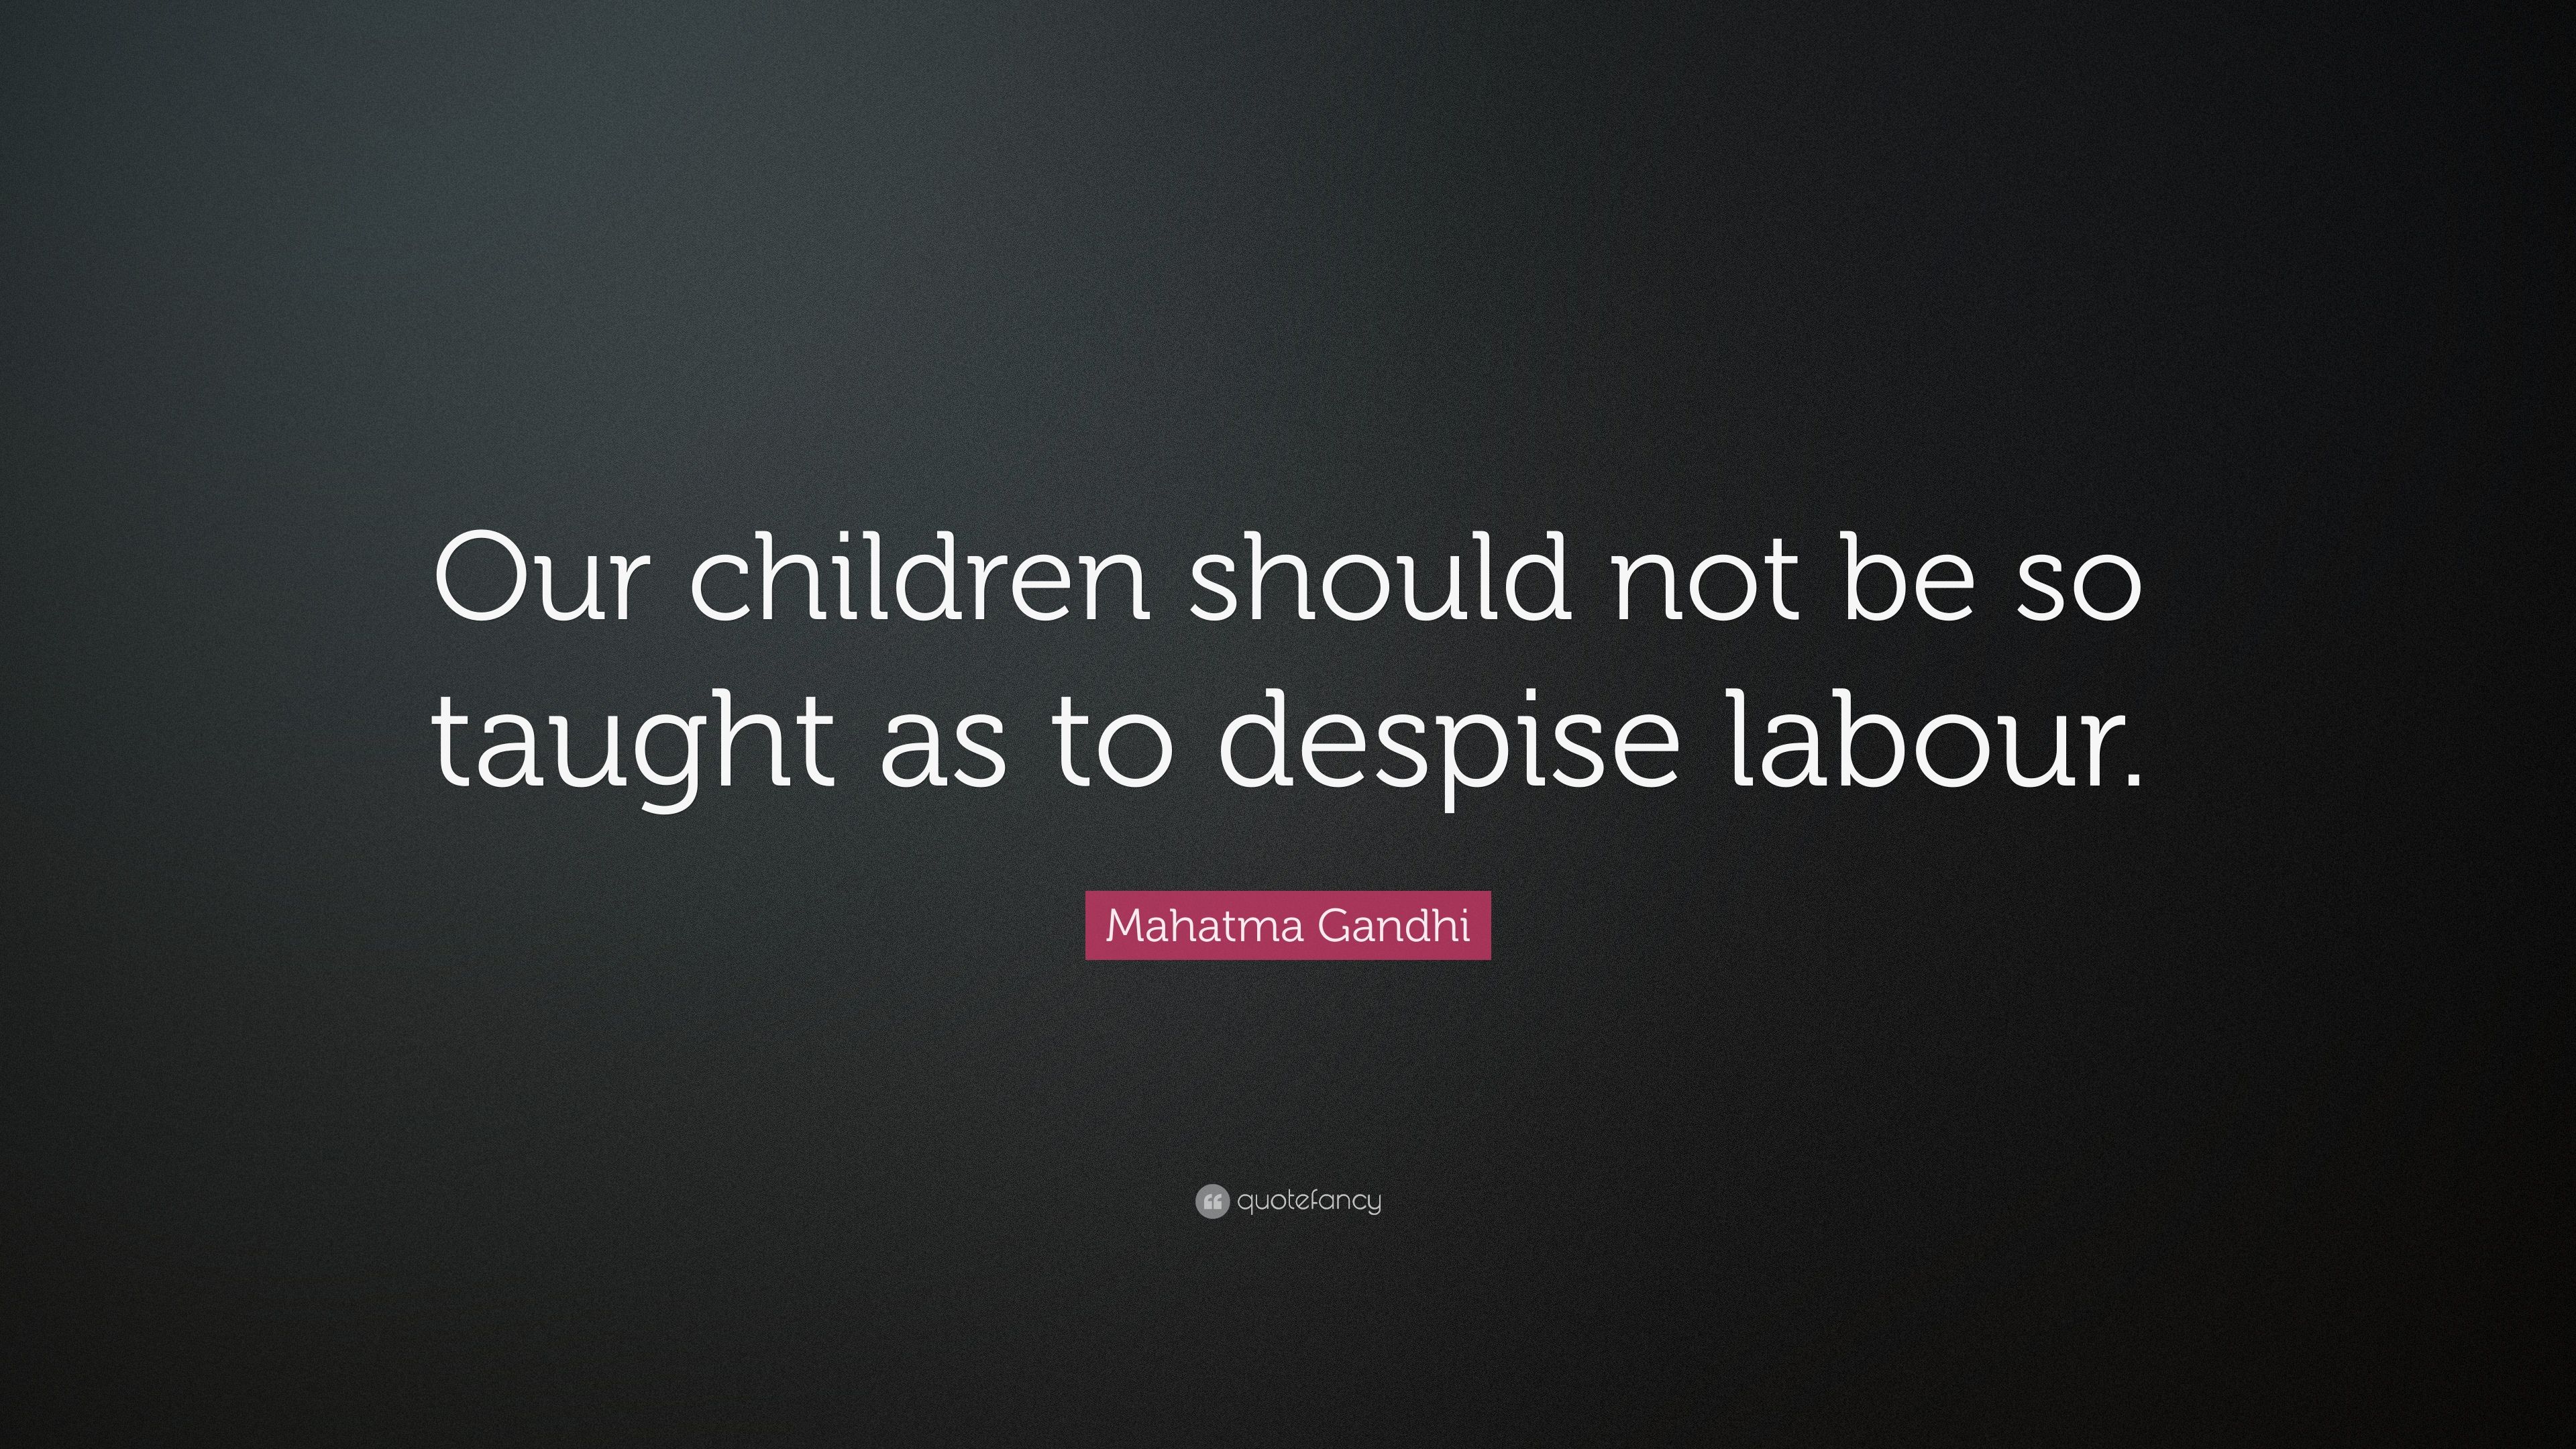 Mahatma Gandhi Quote: “Our children should not be so taught as to despise labour.” (7 wallpaper)